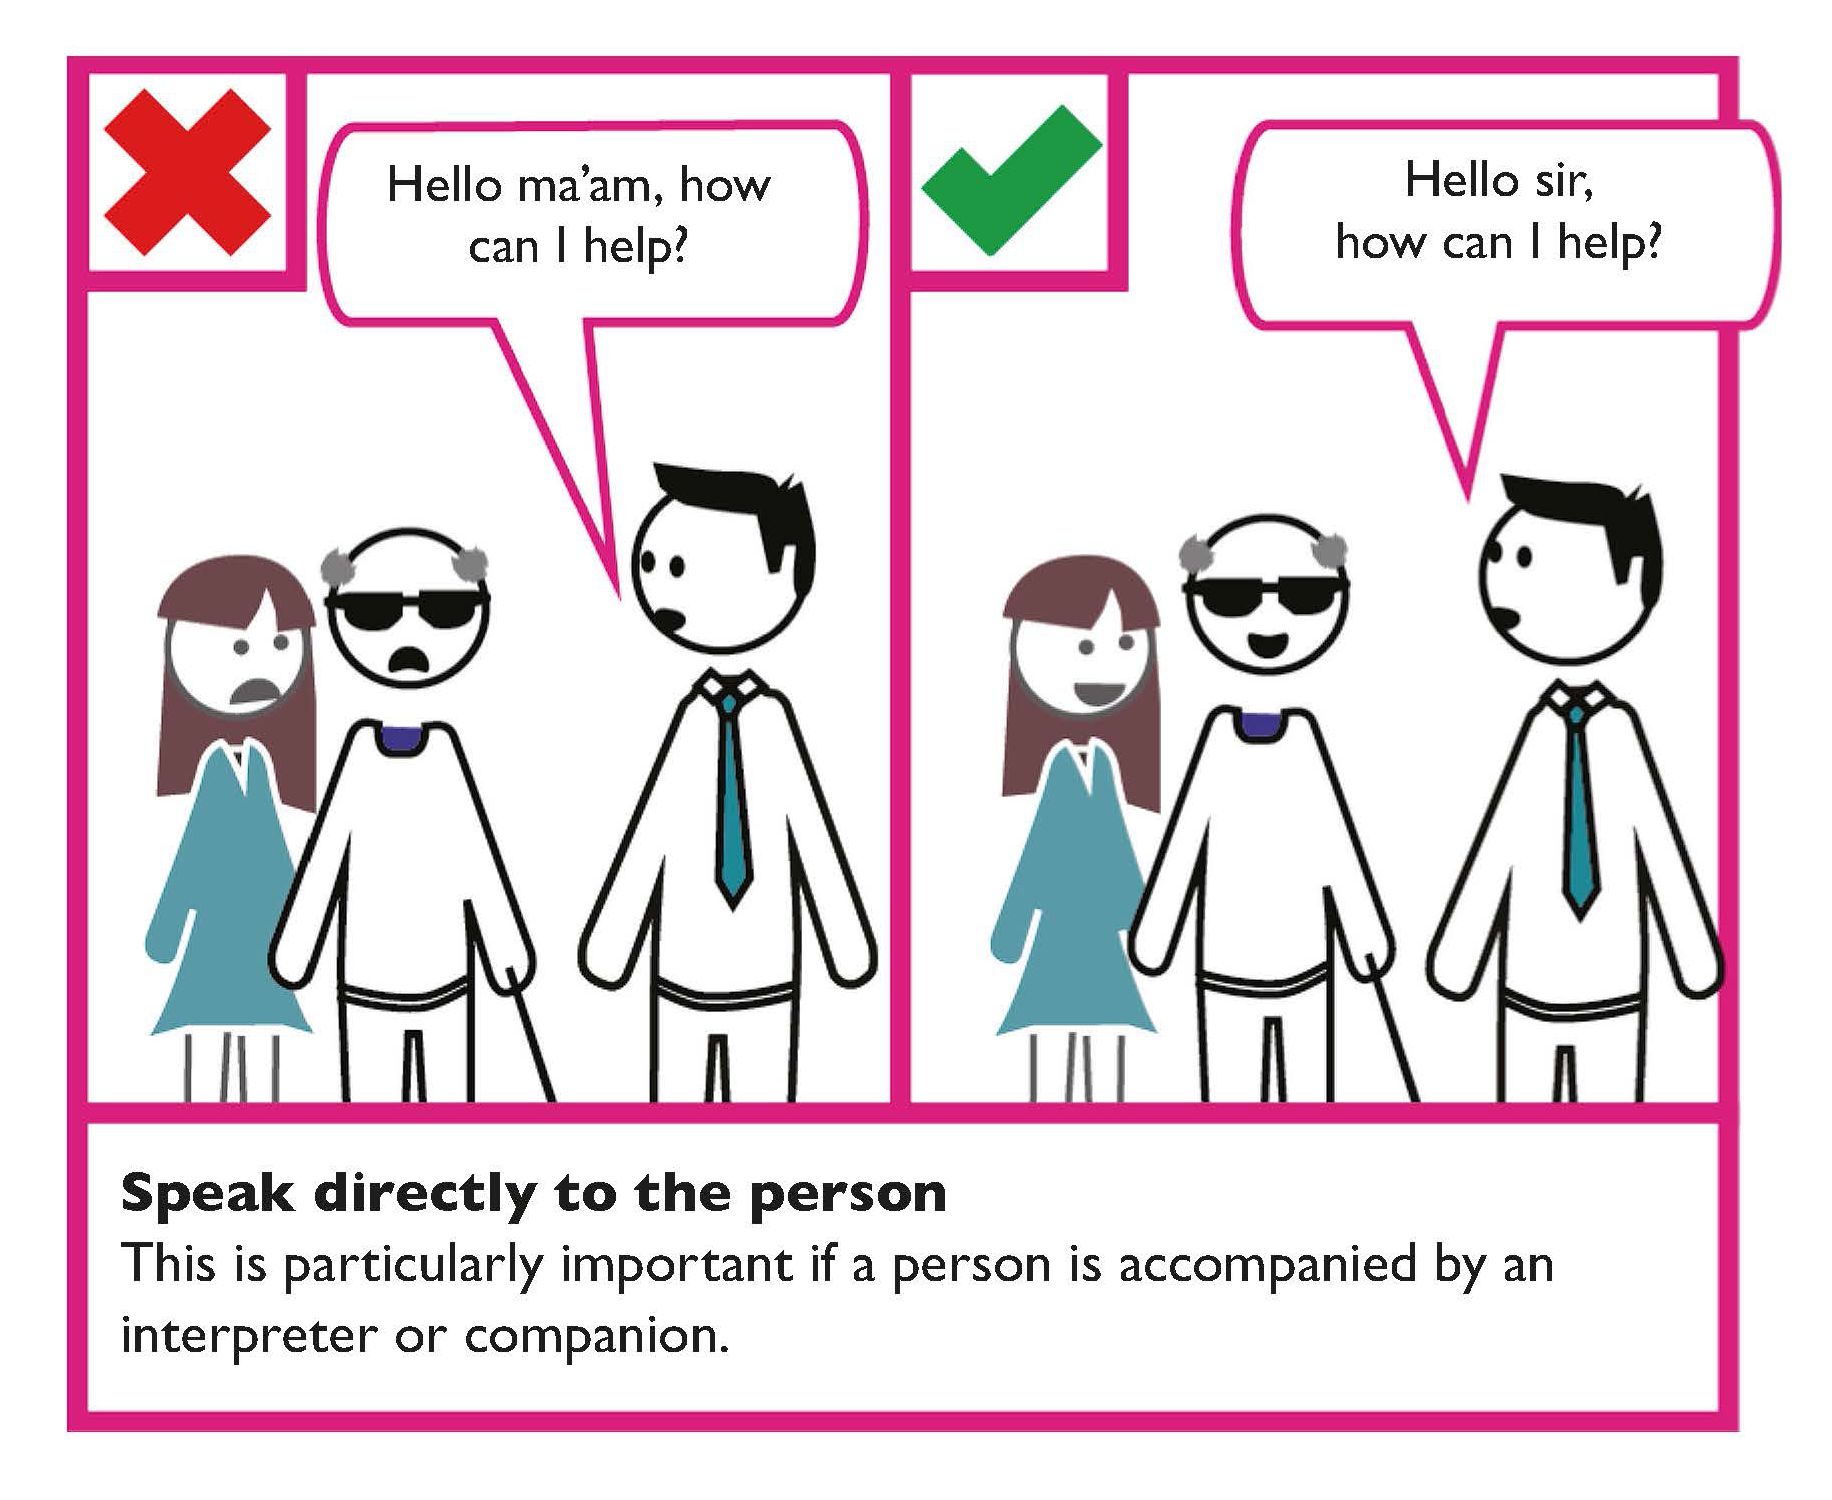 Example of good verbal communication. If the person is accompanied by an interpreter or companion, speak directly to the person and not to the companion or interpreter.